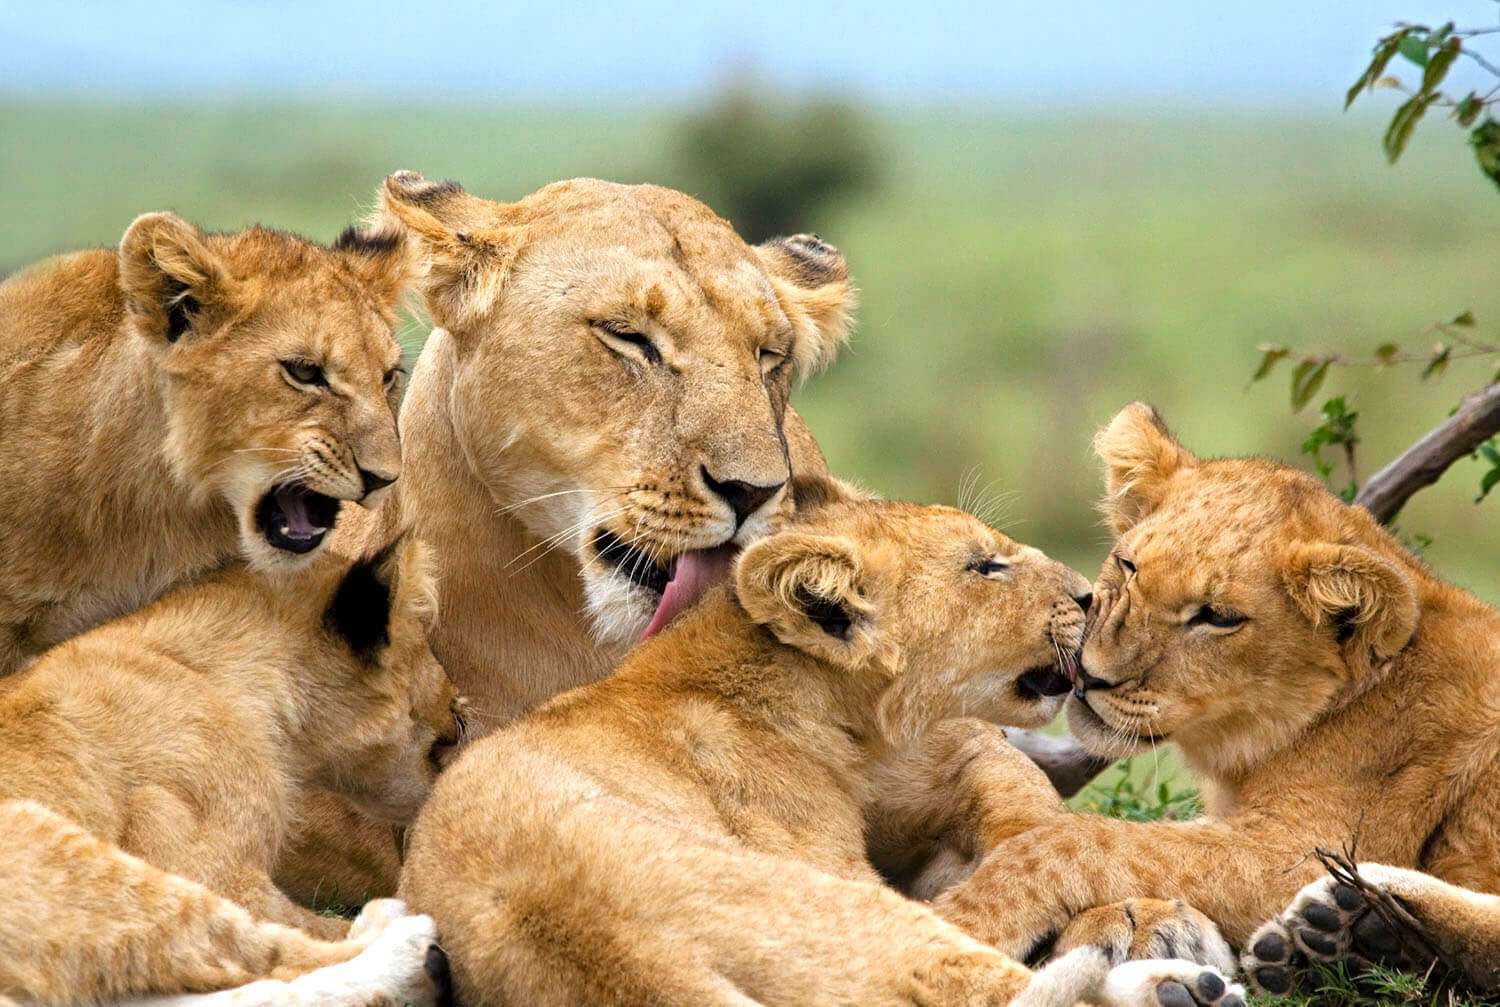 Lions licking